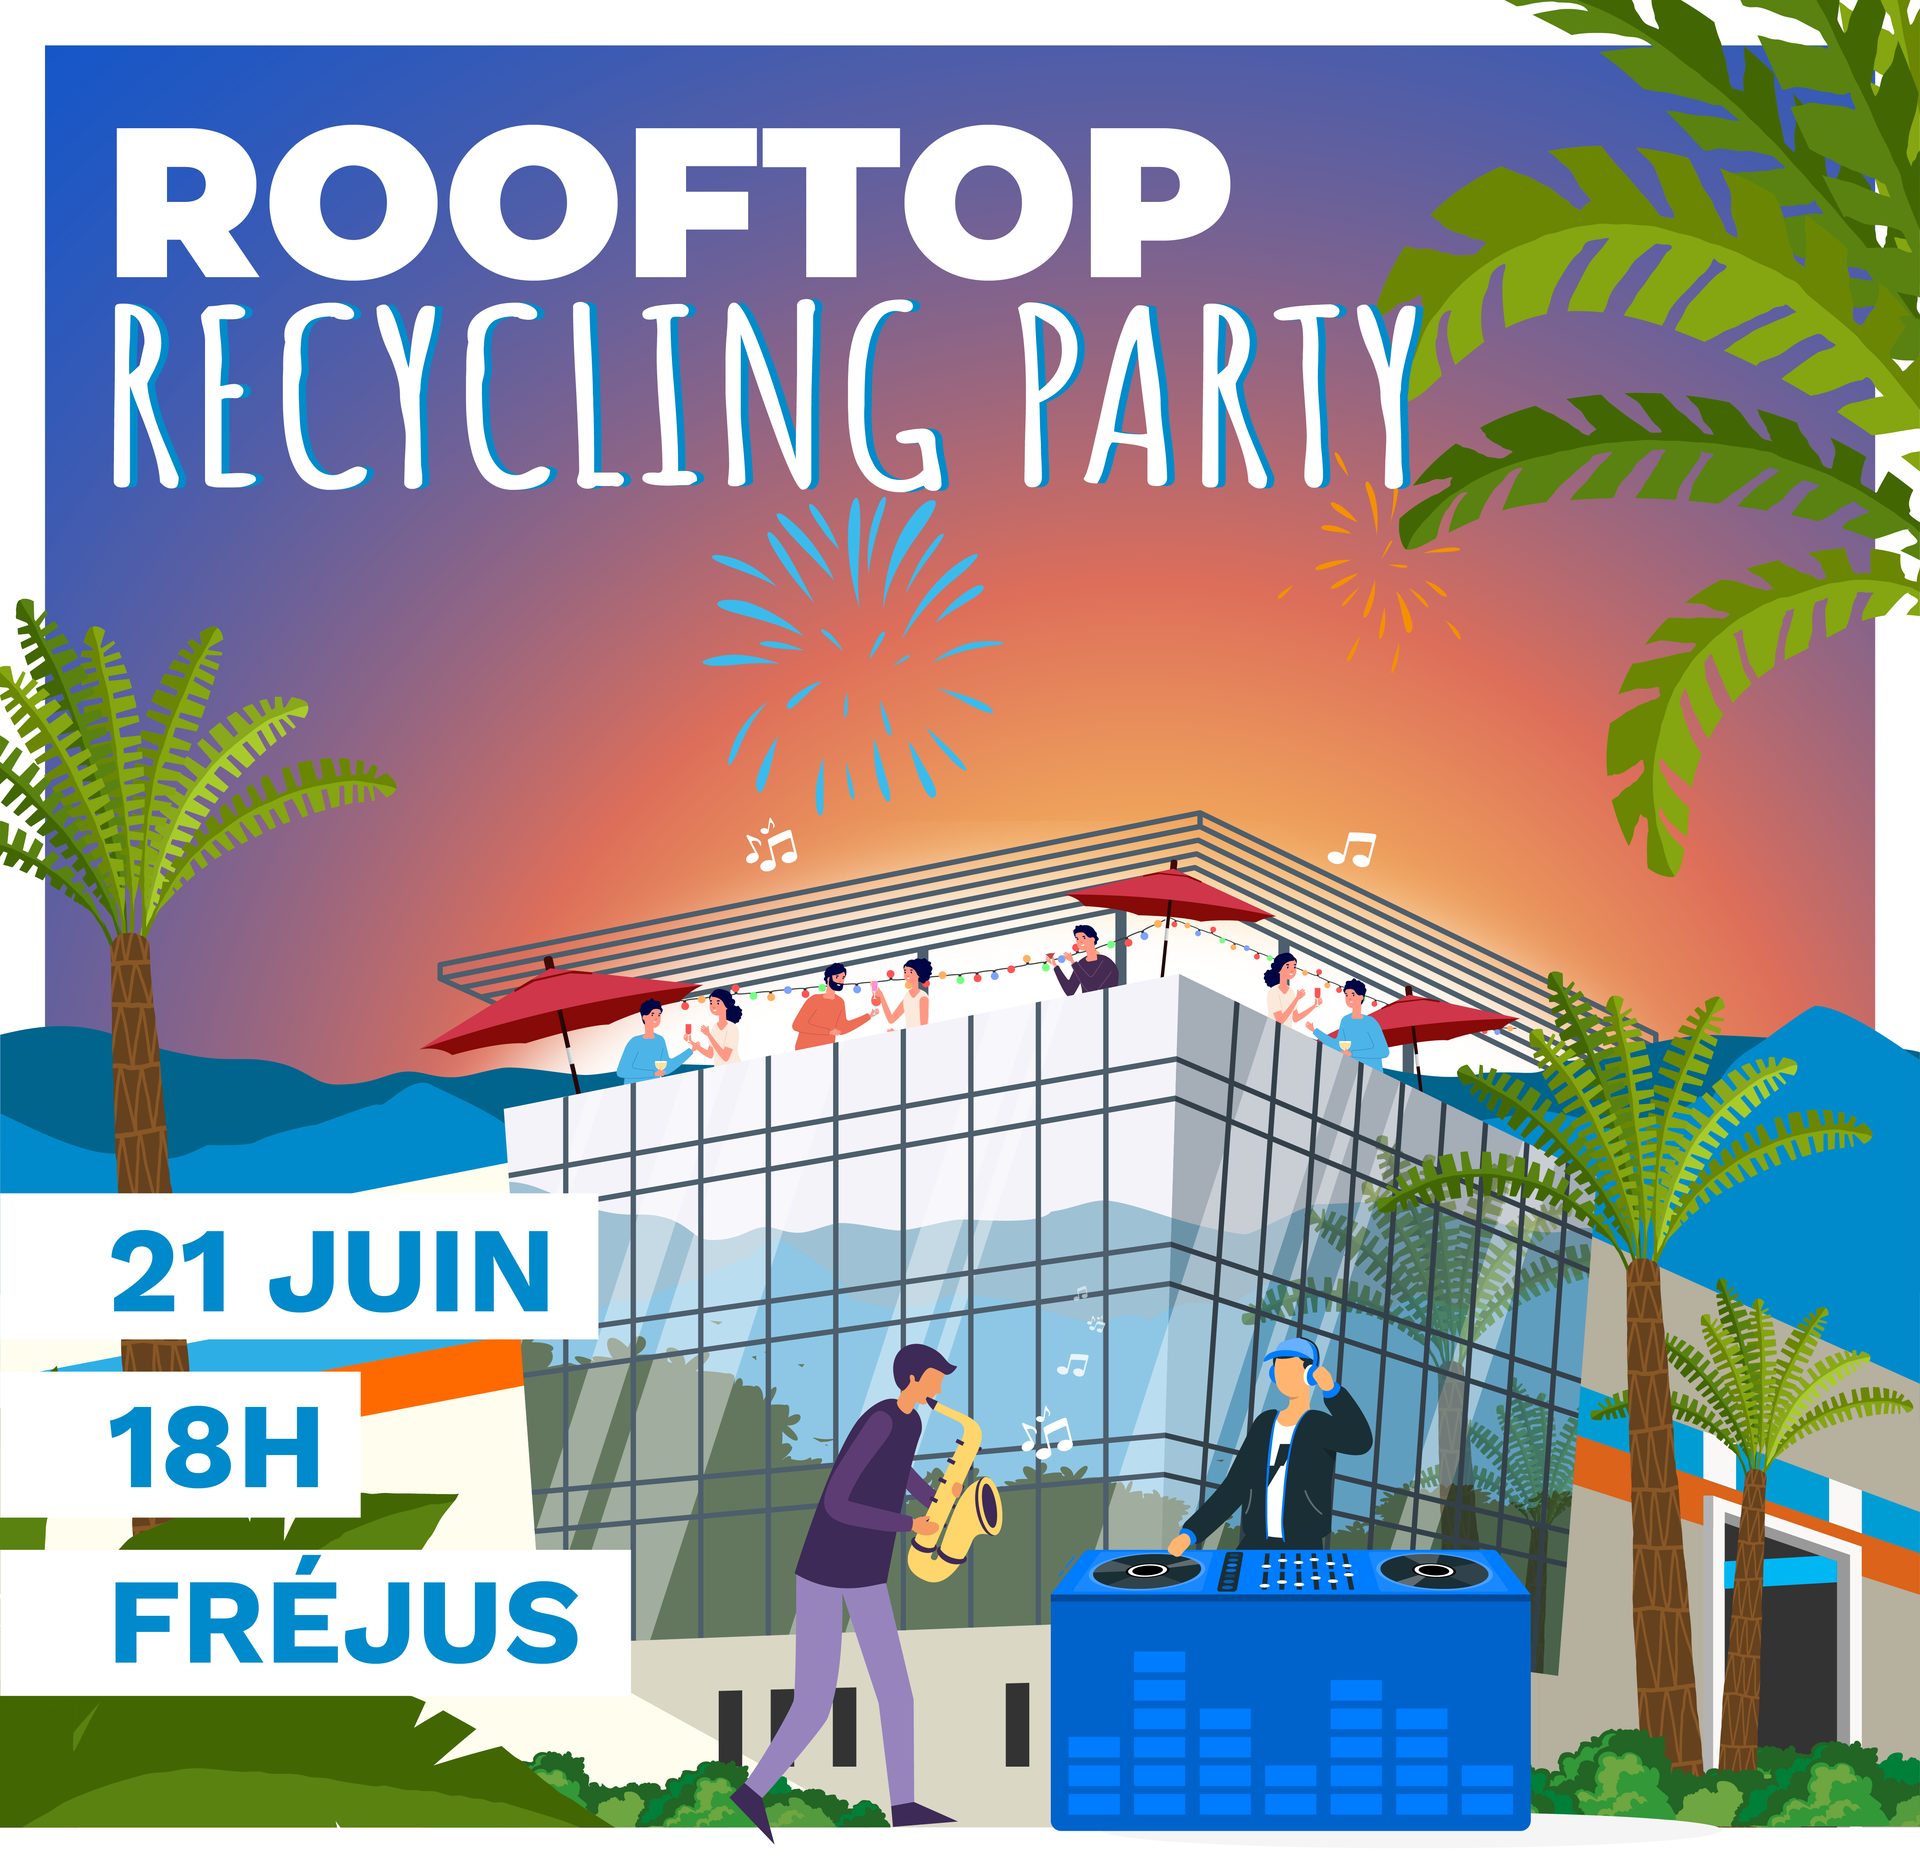 GROUPE SCLAVO – Roof Top Recycling Party